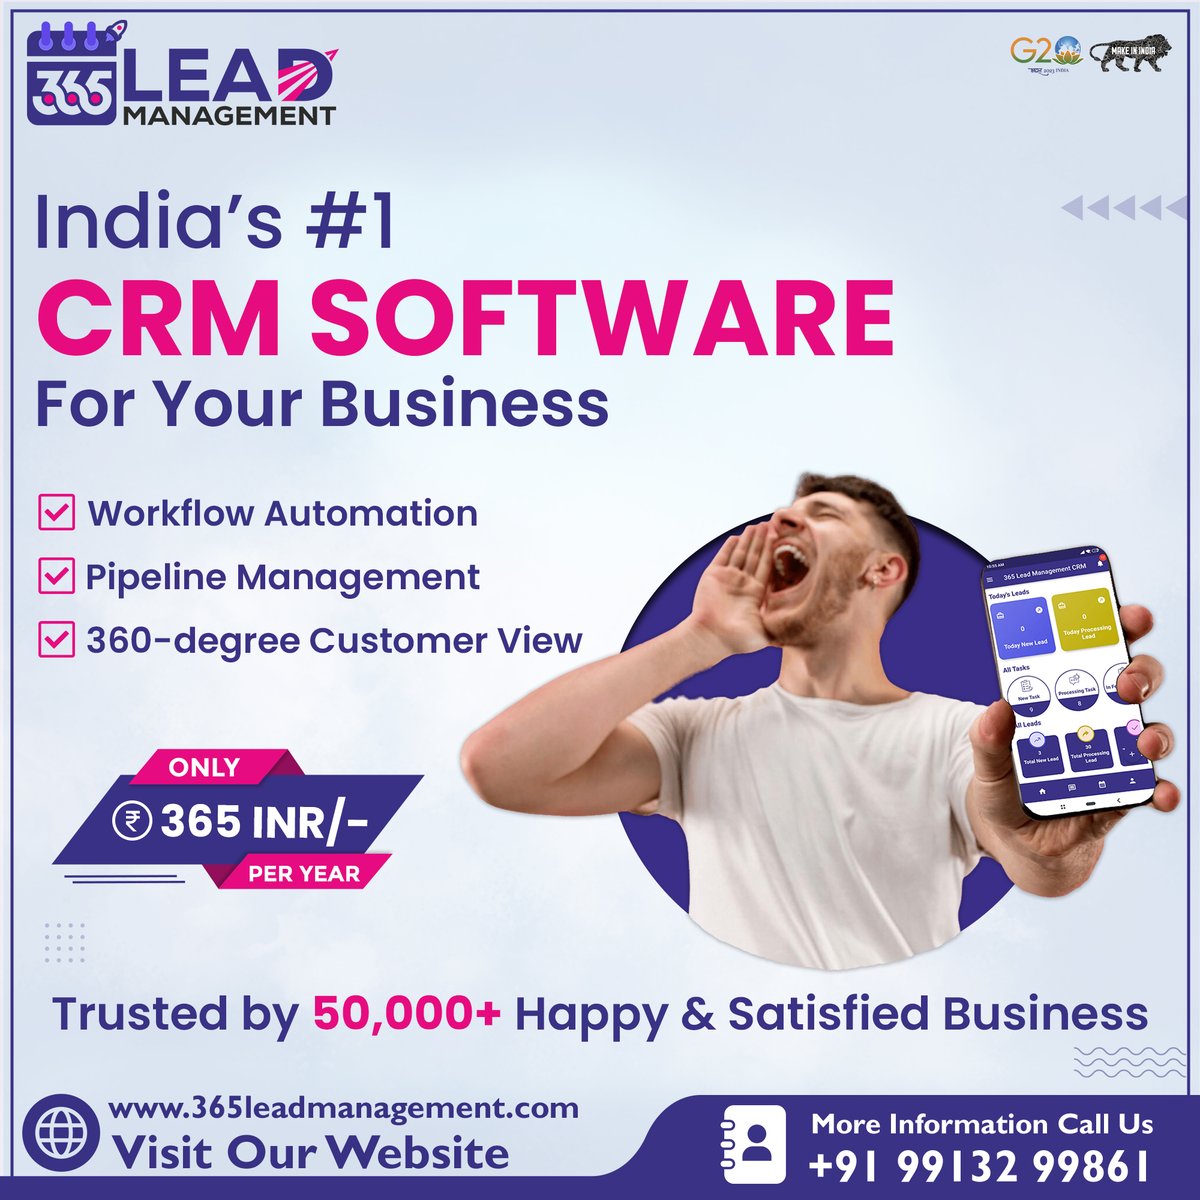 📢 India's #1 CRM Software For Your Business
📢 Trusted by 50,000+ Happy & Satisfied Business
.

☎ +91 99132 99861 | +91 99132 99865
🌐 365leadmanagement.com
.
#crm #leadmanagement #leadmanagementsoftware #leadmanagementsystem #lead #businesslead #crmsoftware #crmsolutions